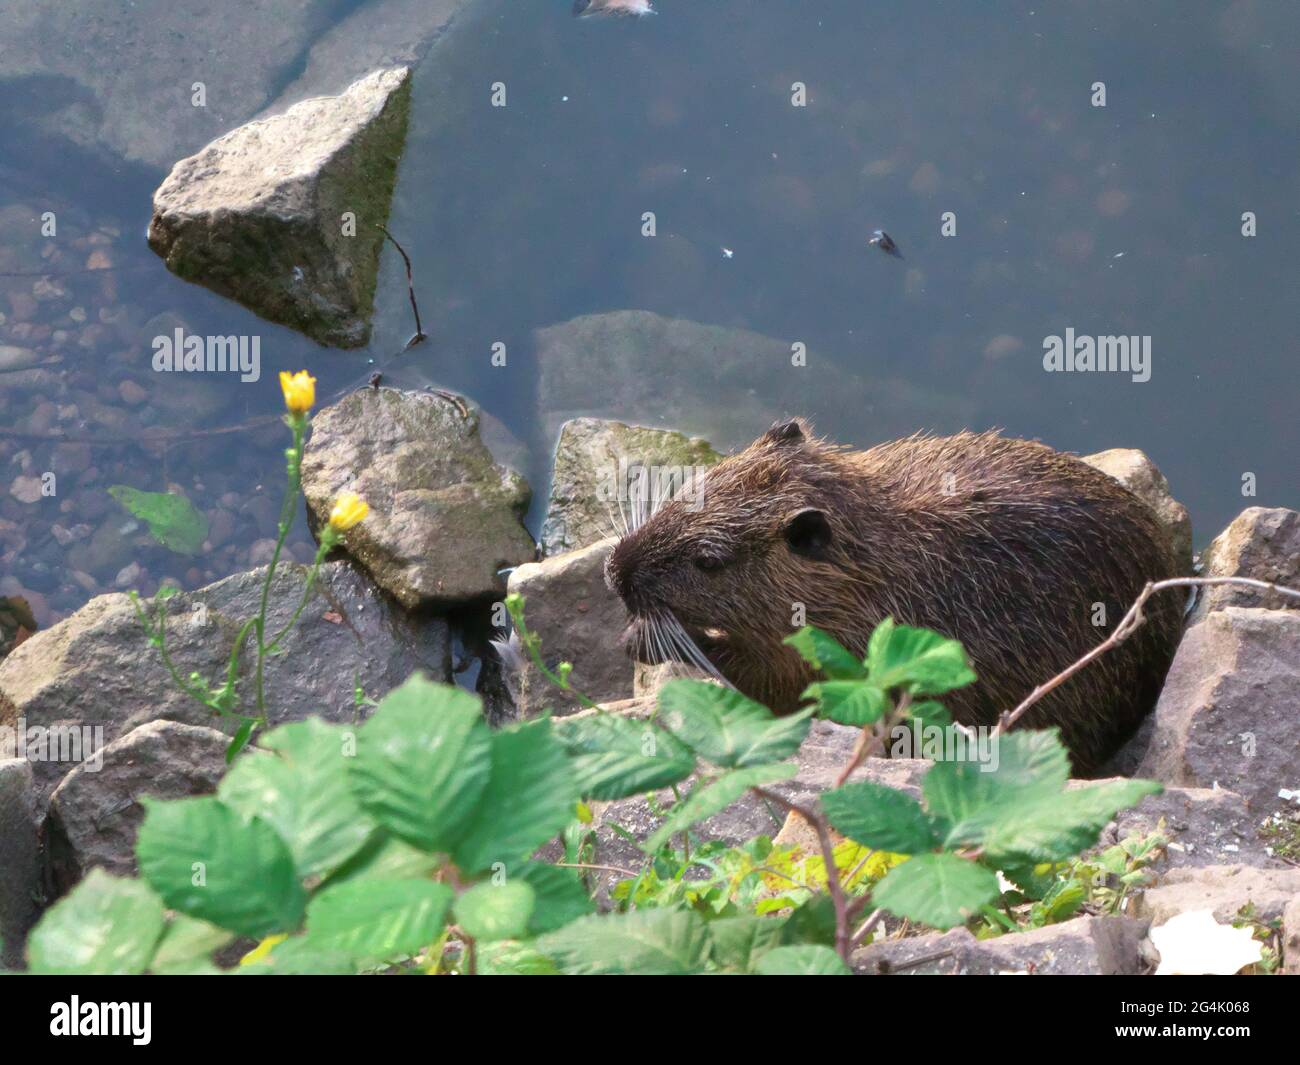 Wet young nutria sitting on stone wall Stock Photo